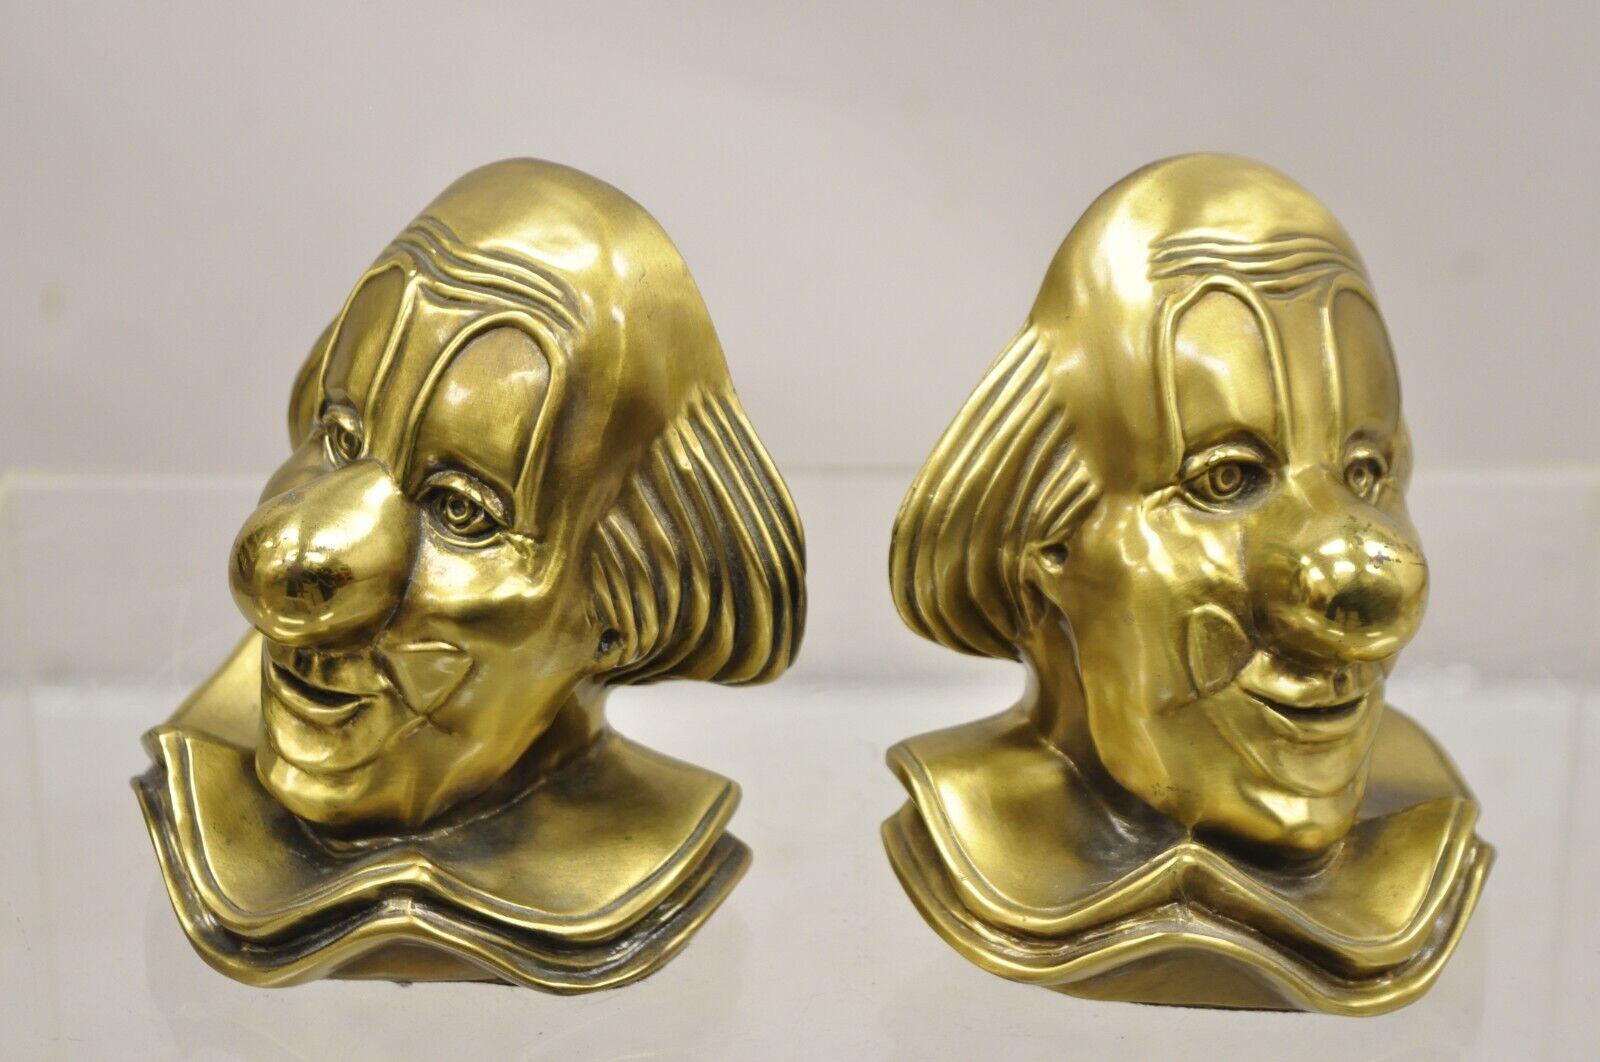 Vintage PM Craftsman Brass Figural Clown Bookends - A Pair For Sale 3